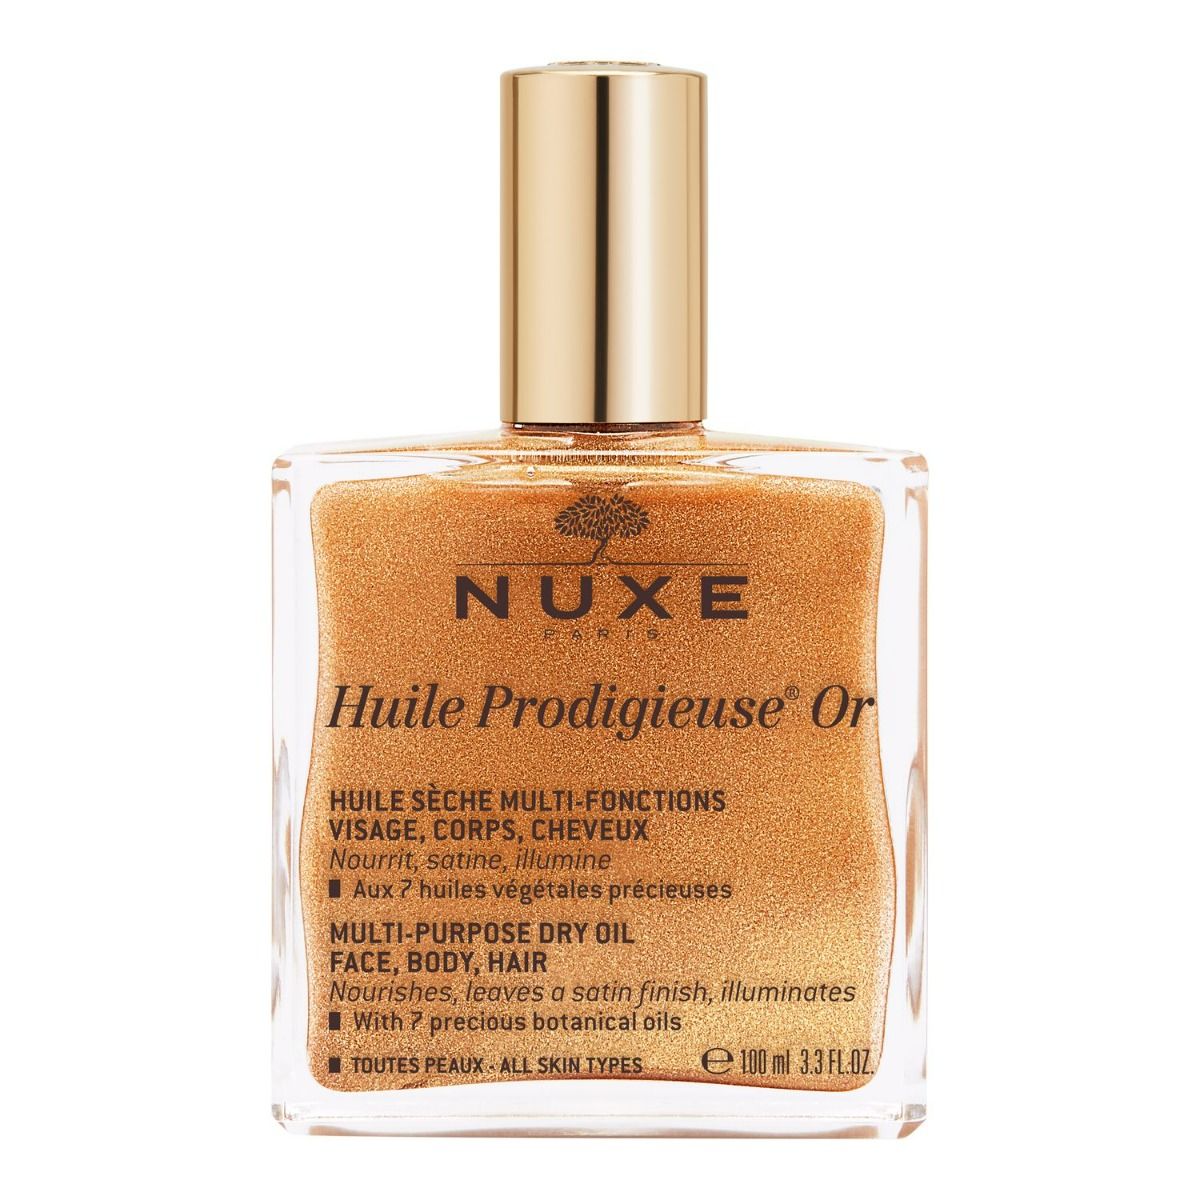 Nuxe Huile Prodigieuse Or масло для лица, тела и волос, 100 ml nuxe мерцающее сухое масло для лица тела и волос huile or 100 мл nuxe prodigieuse